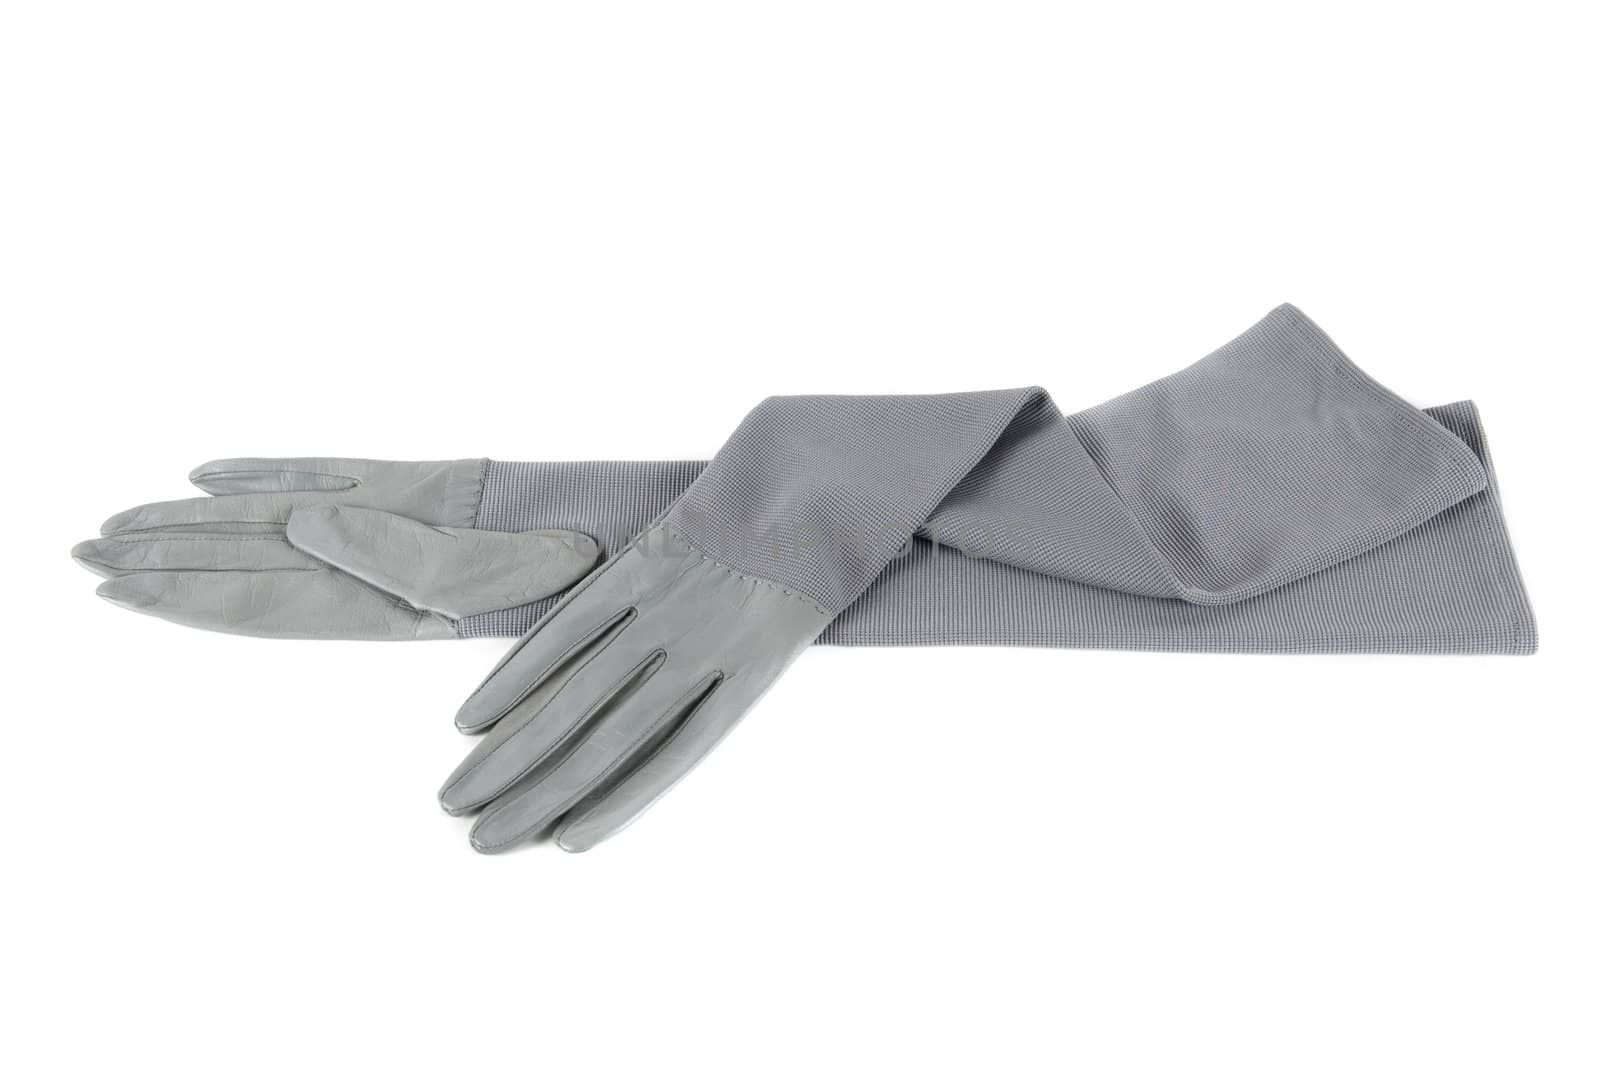 gray modern female leather gloves isolated on a white